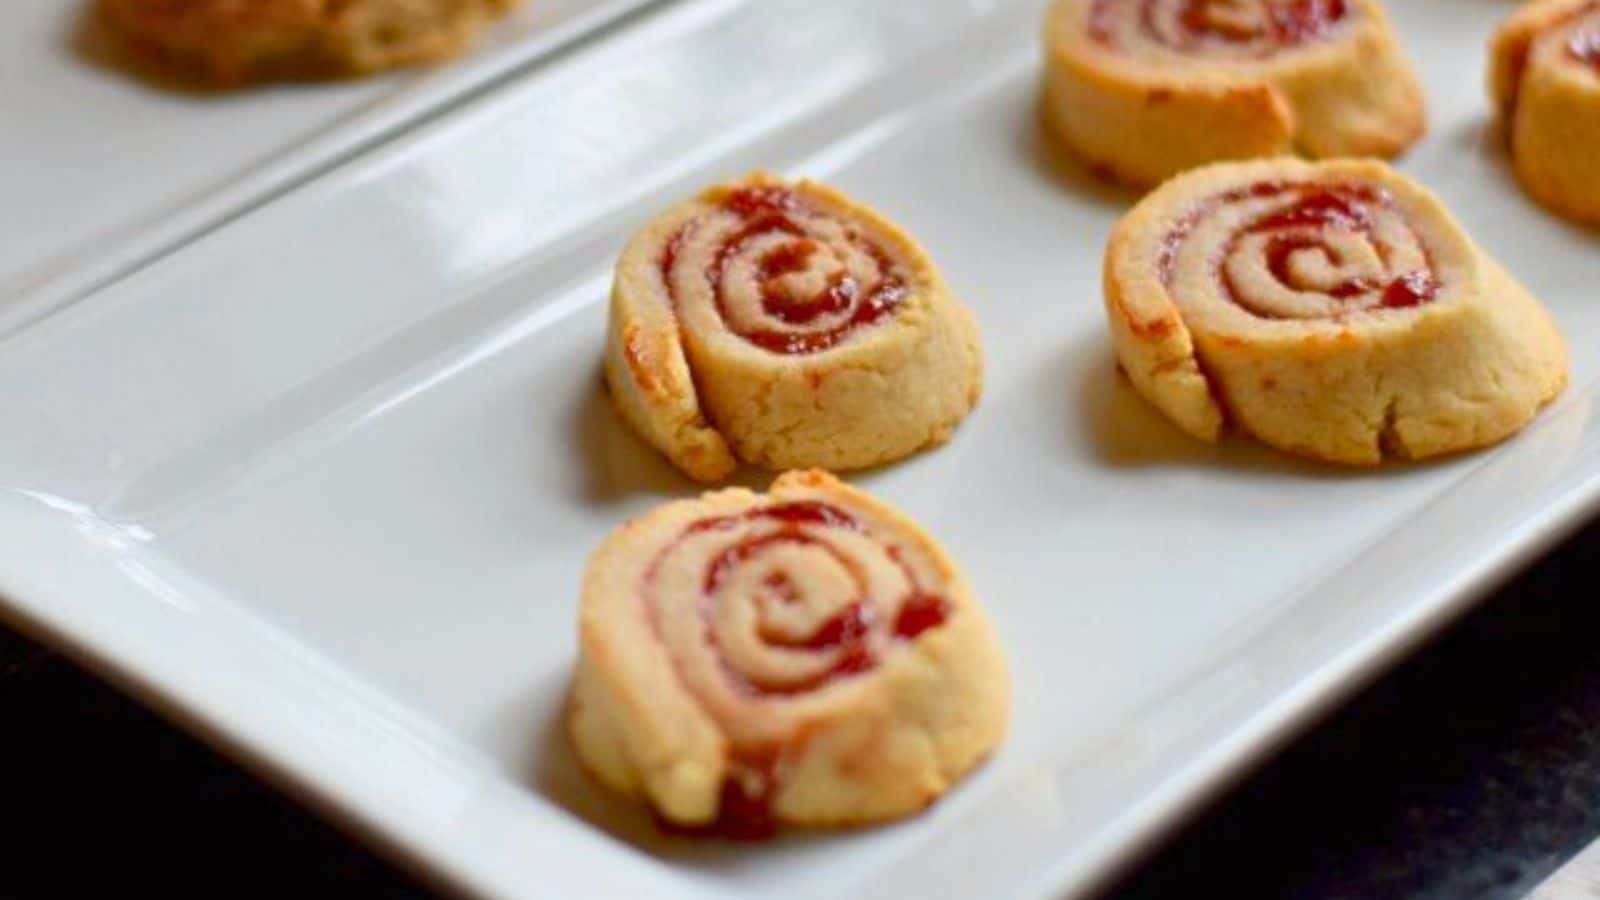 Image shows a plate with cherry pie pinwheel cookies sitting on it.